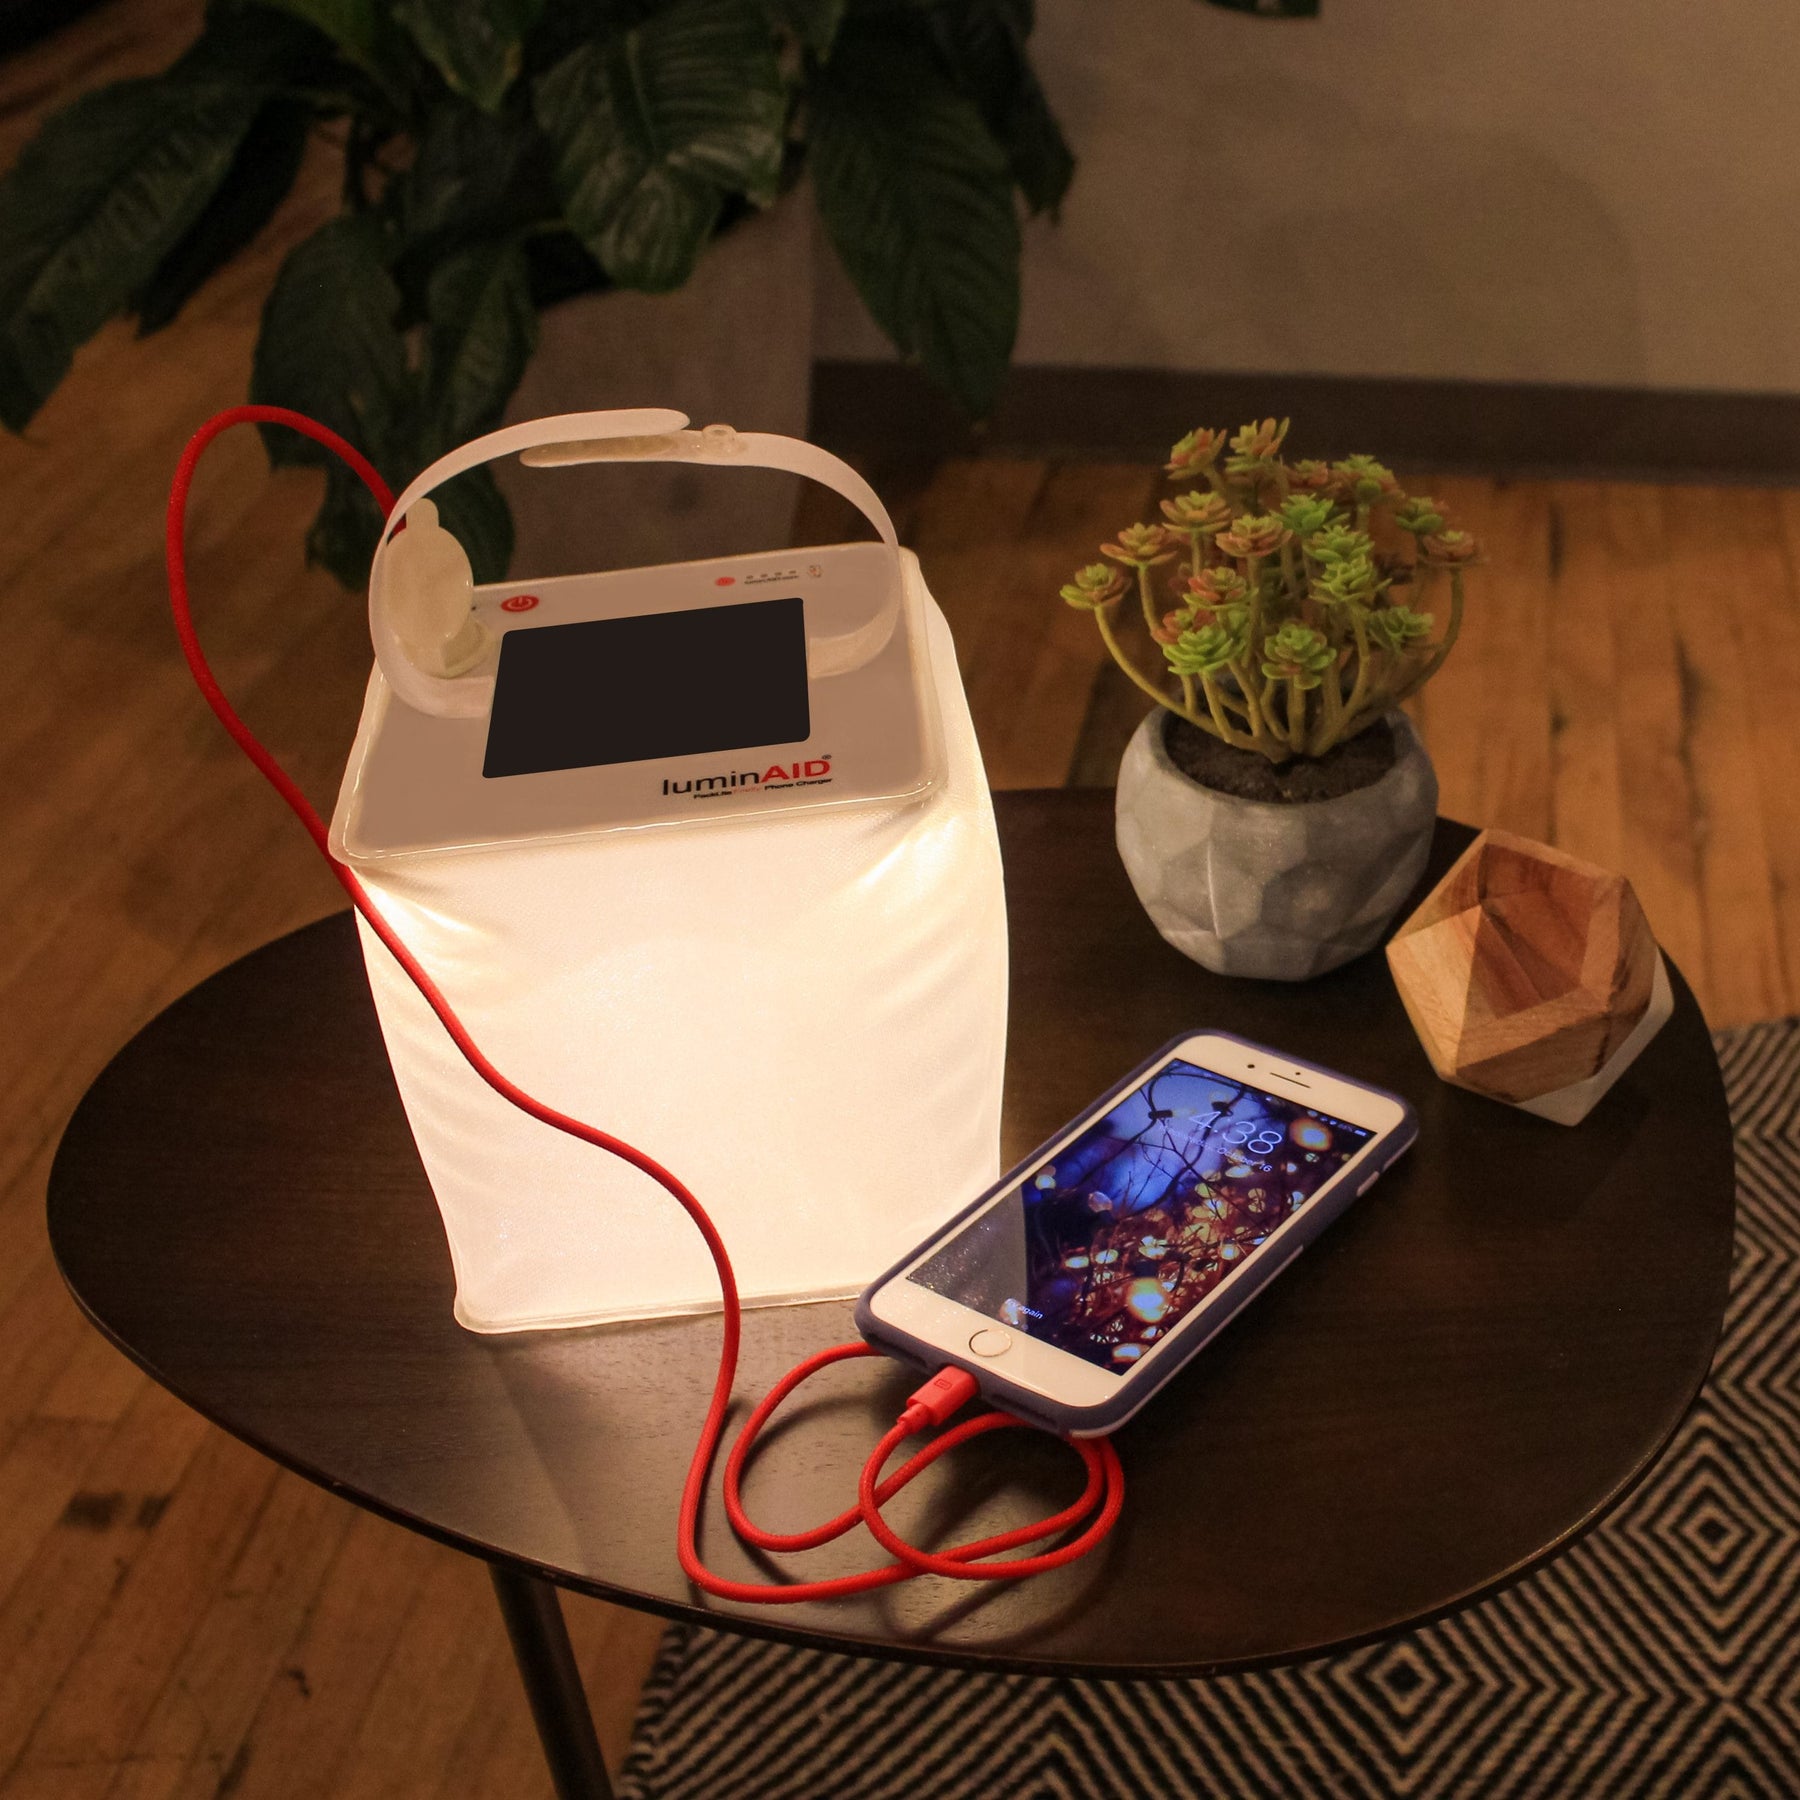 Firefly power lantern lighting up a table and charging a phone.